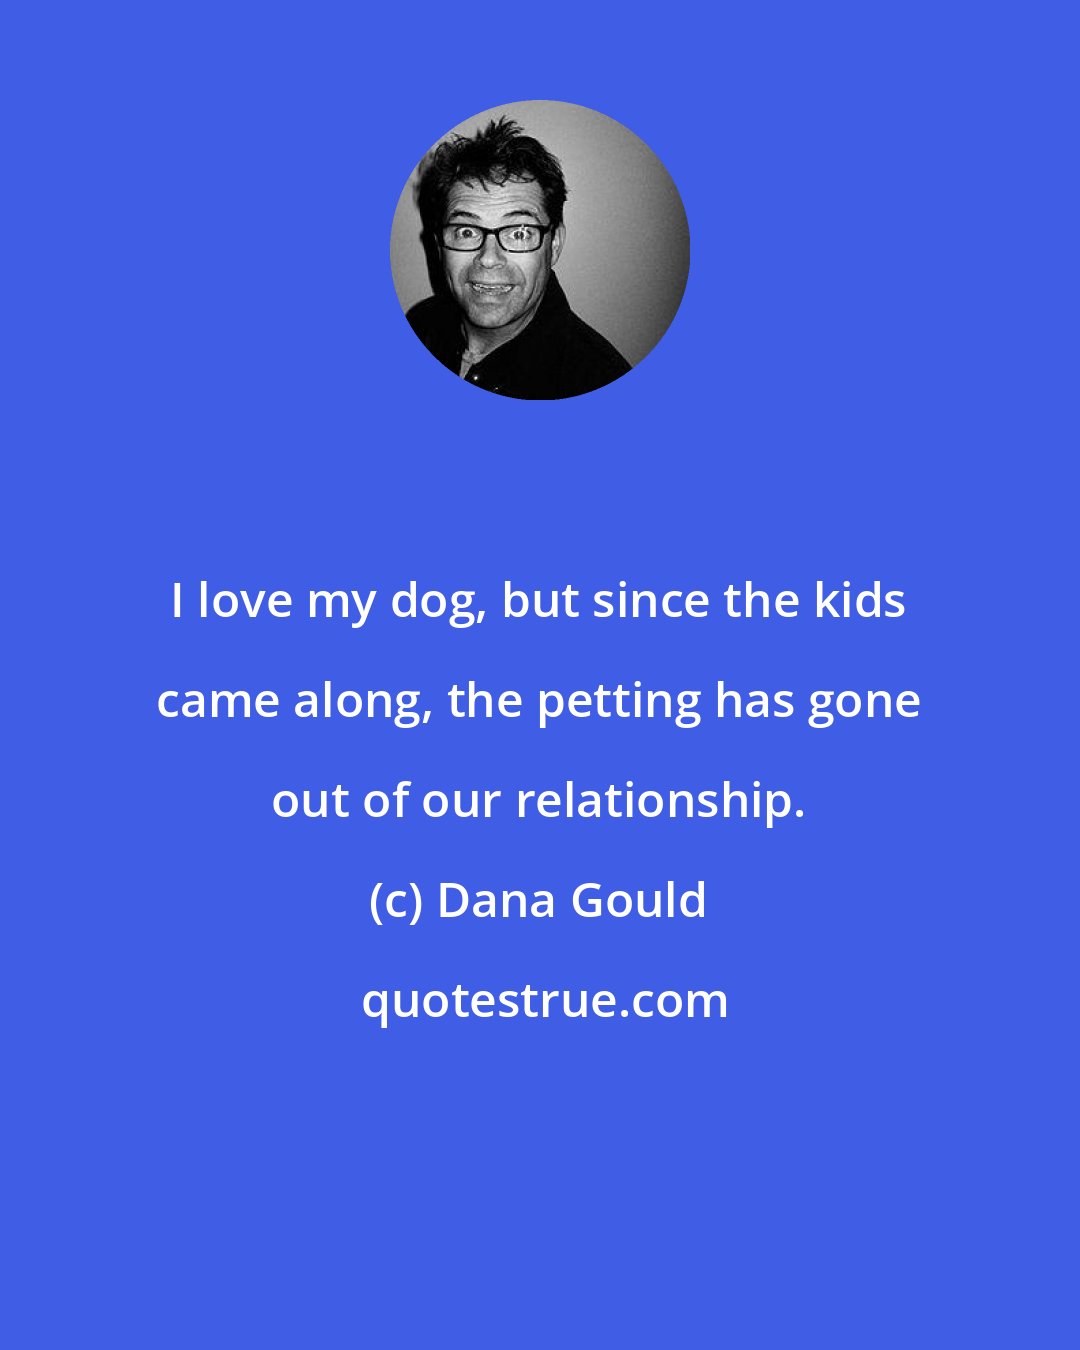 Dana Gould: I love my dog, but since the kids came along, the petting has gone out of our relationship.